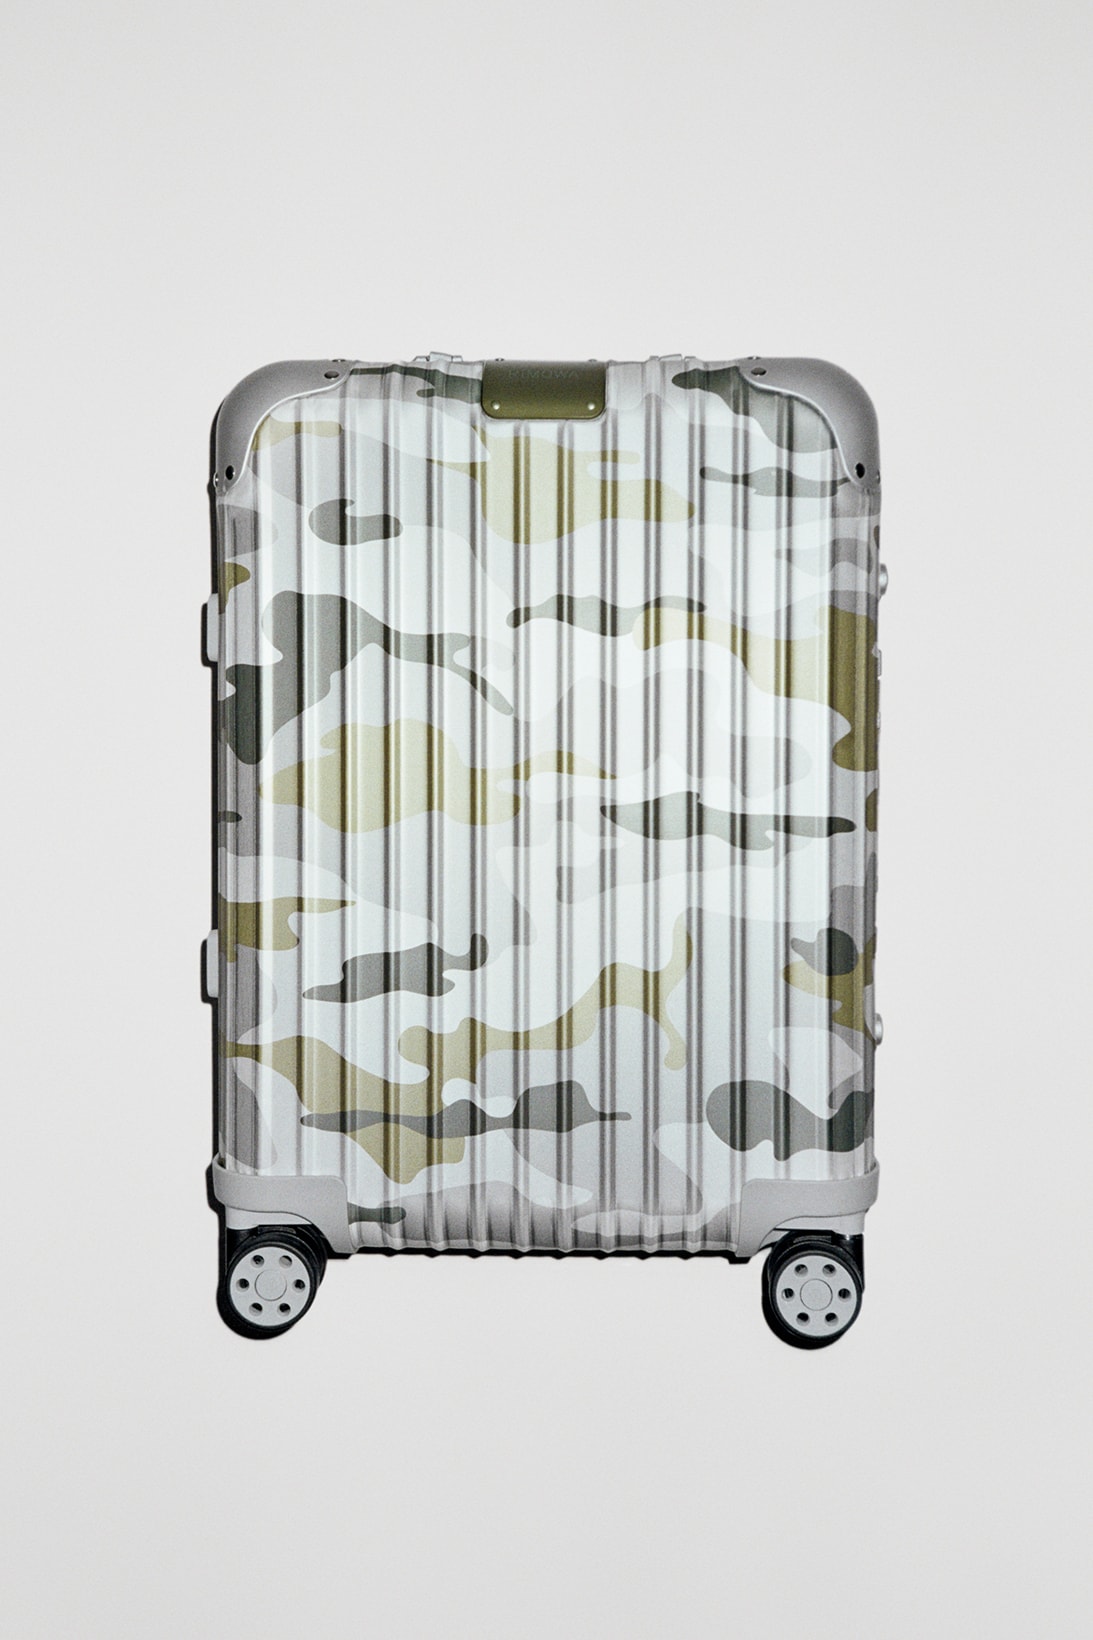 Suitable for Rimowa Trolley Case Logo Box Stickers Luggage